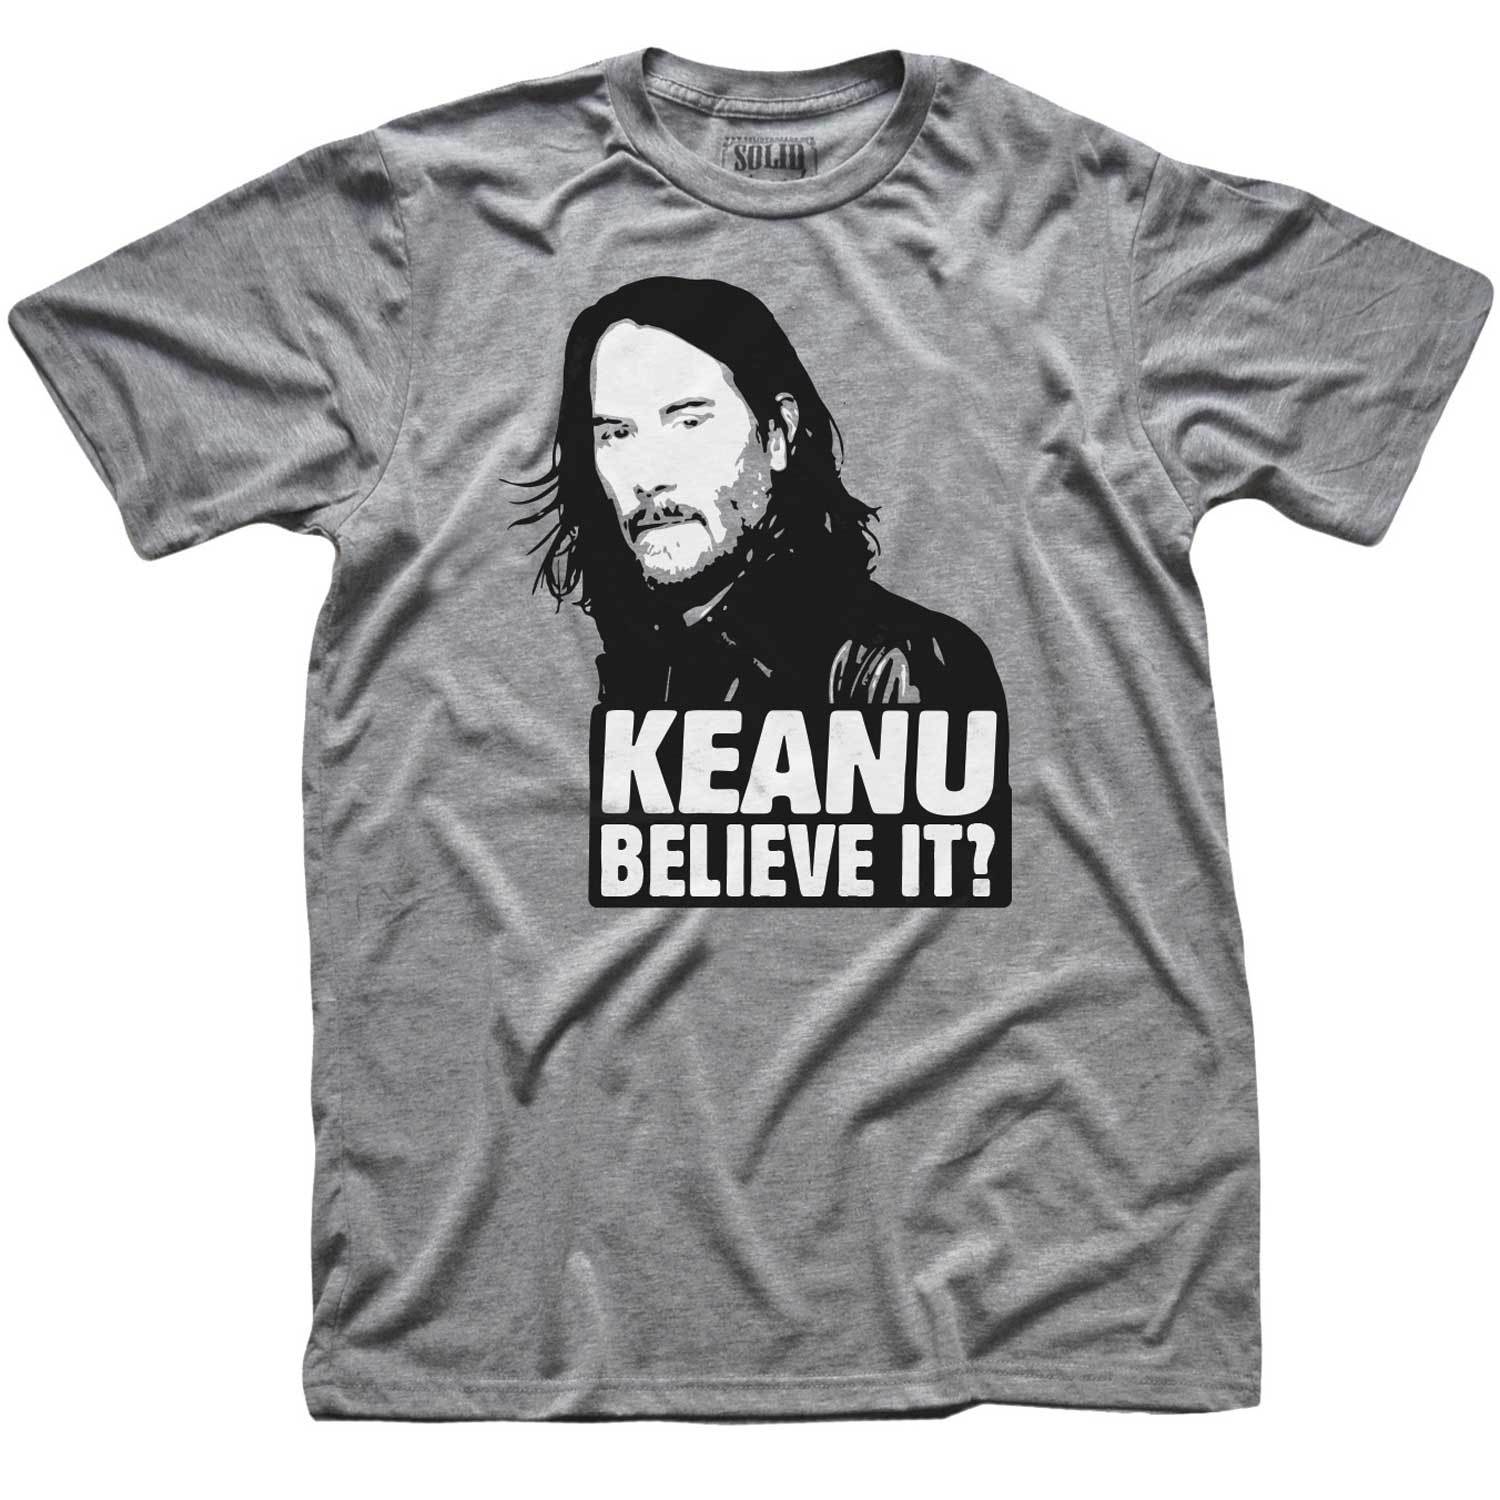 Men's Keanu Believe It? Vintage Graphic T-Shirt | Funny The Matrix Tee | Solid Threads